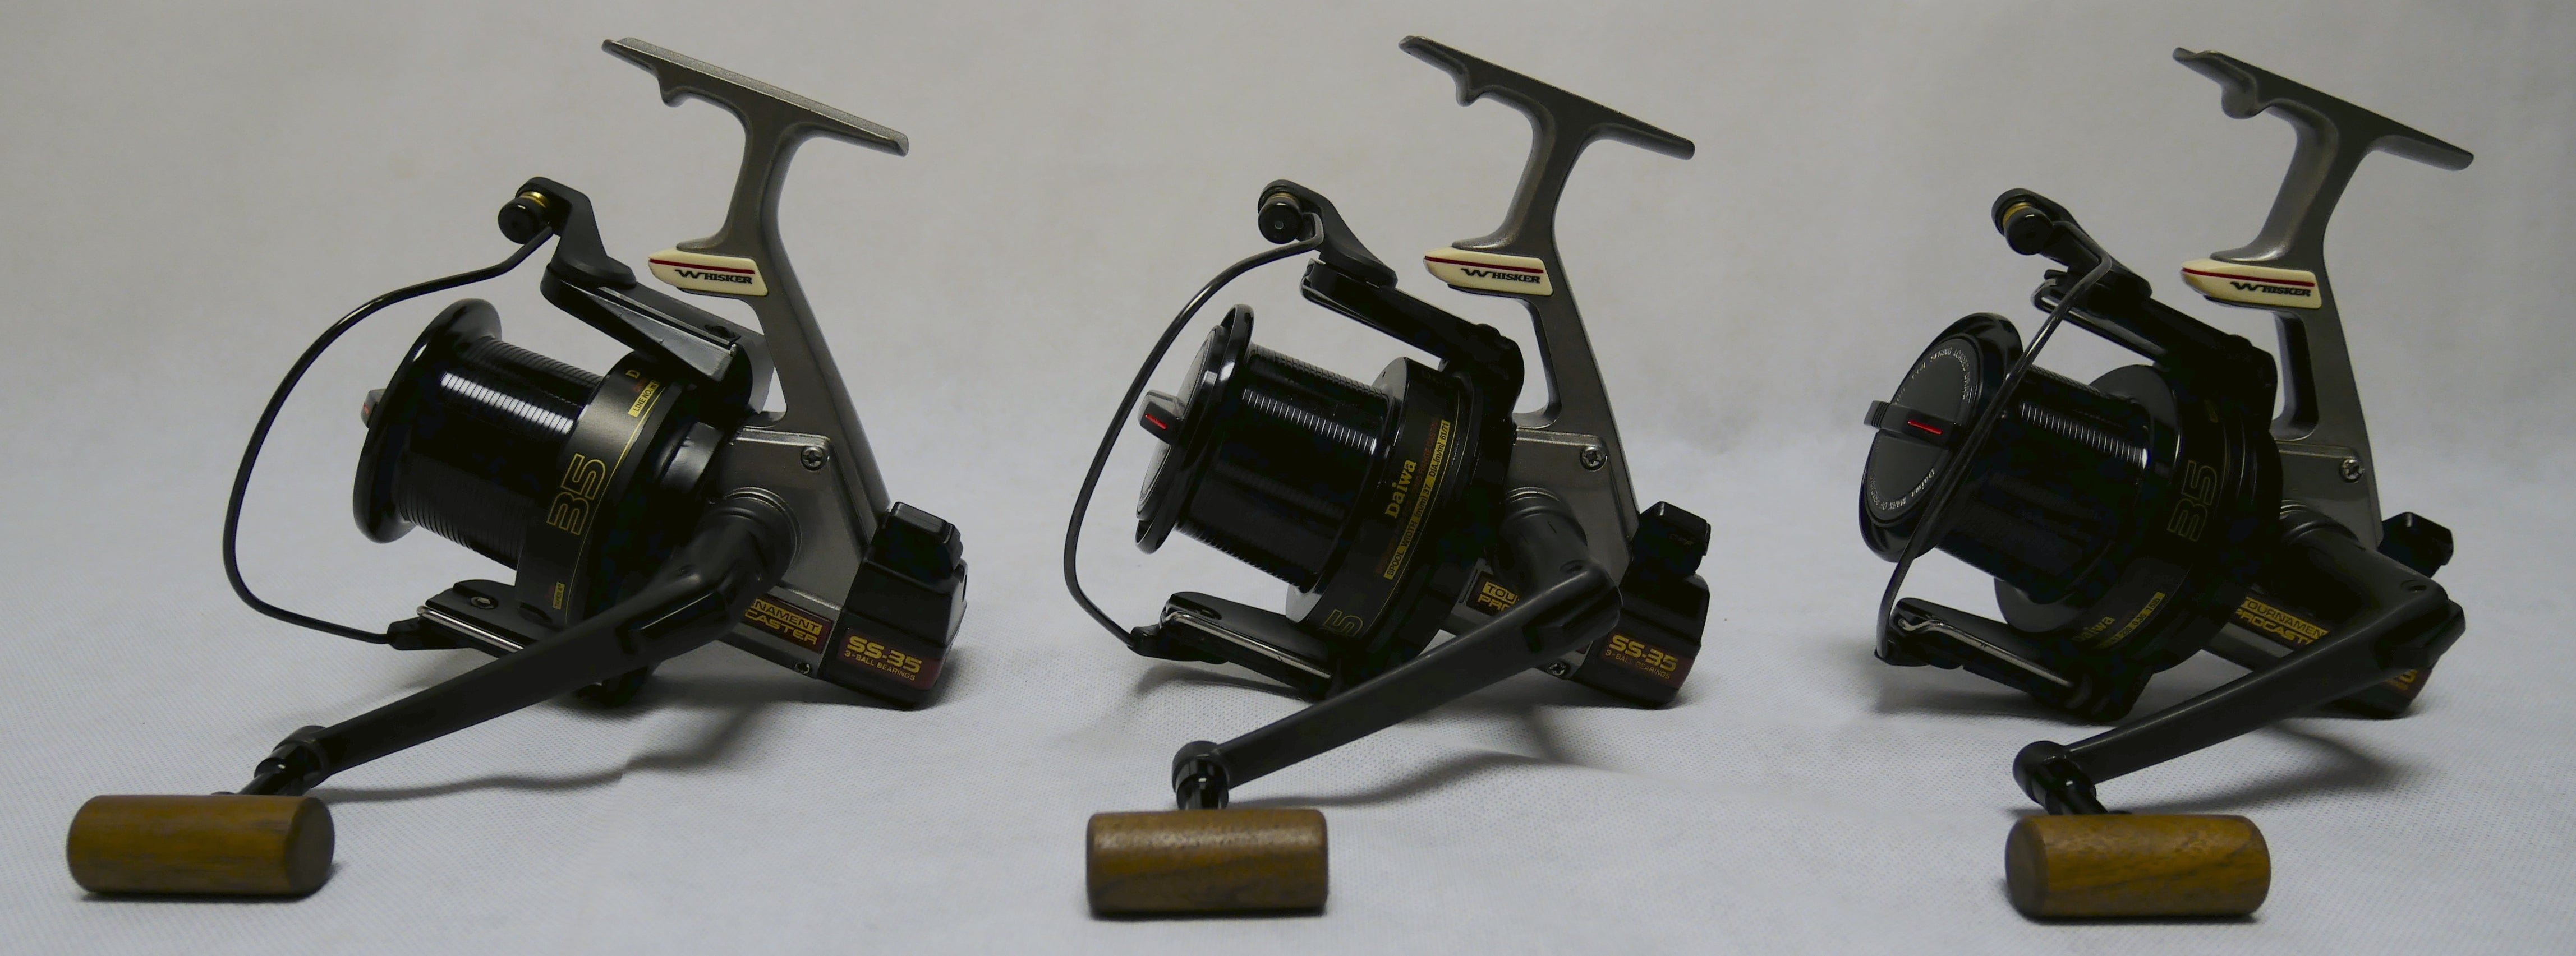 Daiwa Whisker Tournament Procaster SS-35 Reels X3 – Fish For Tackle